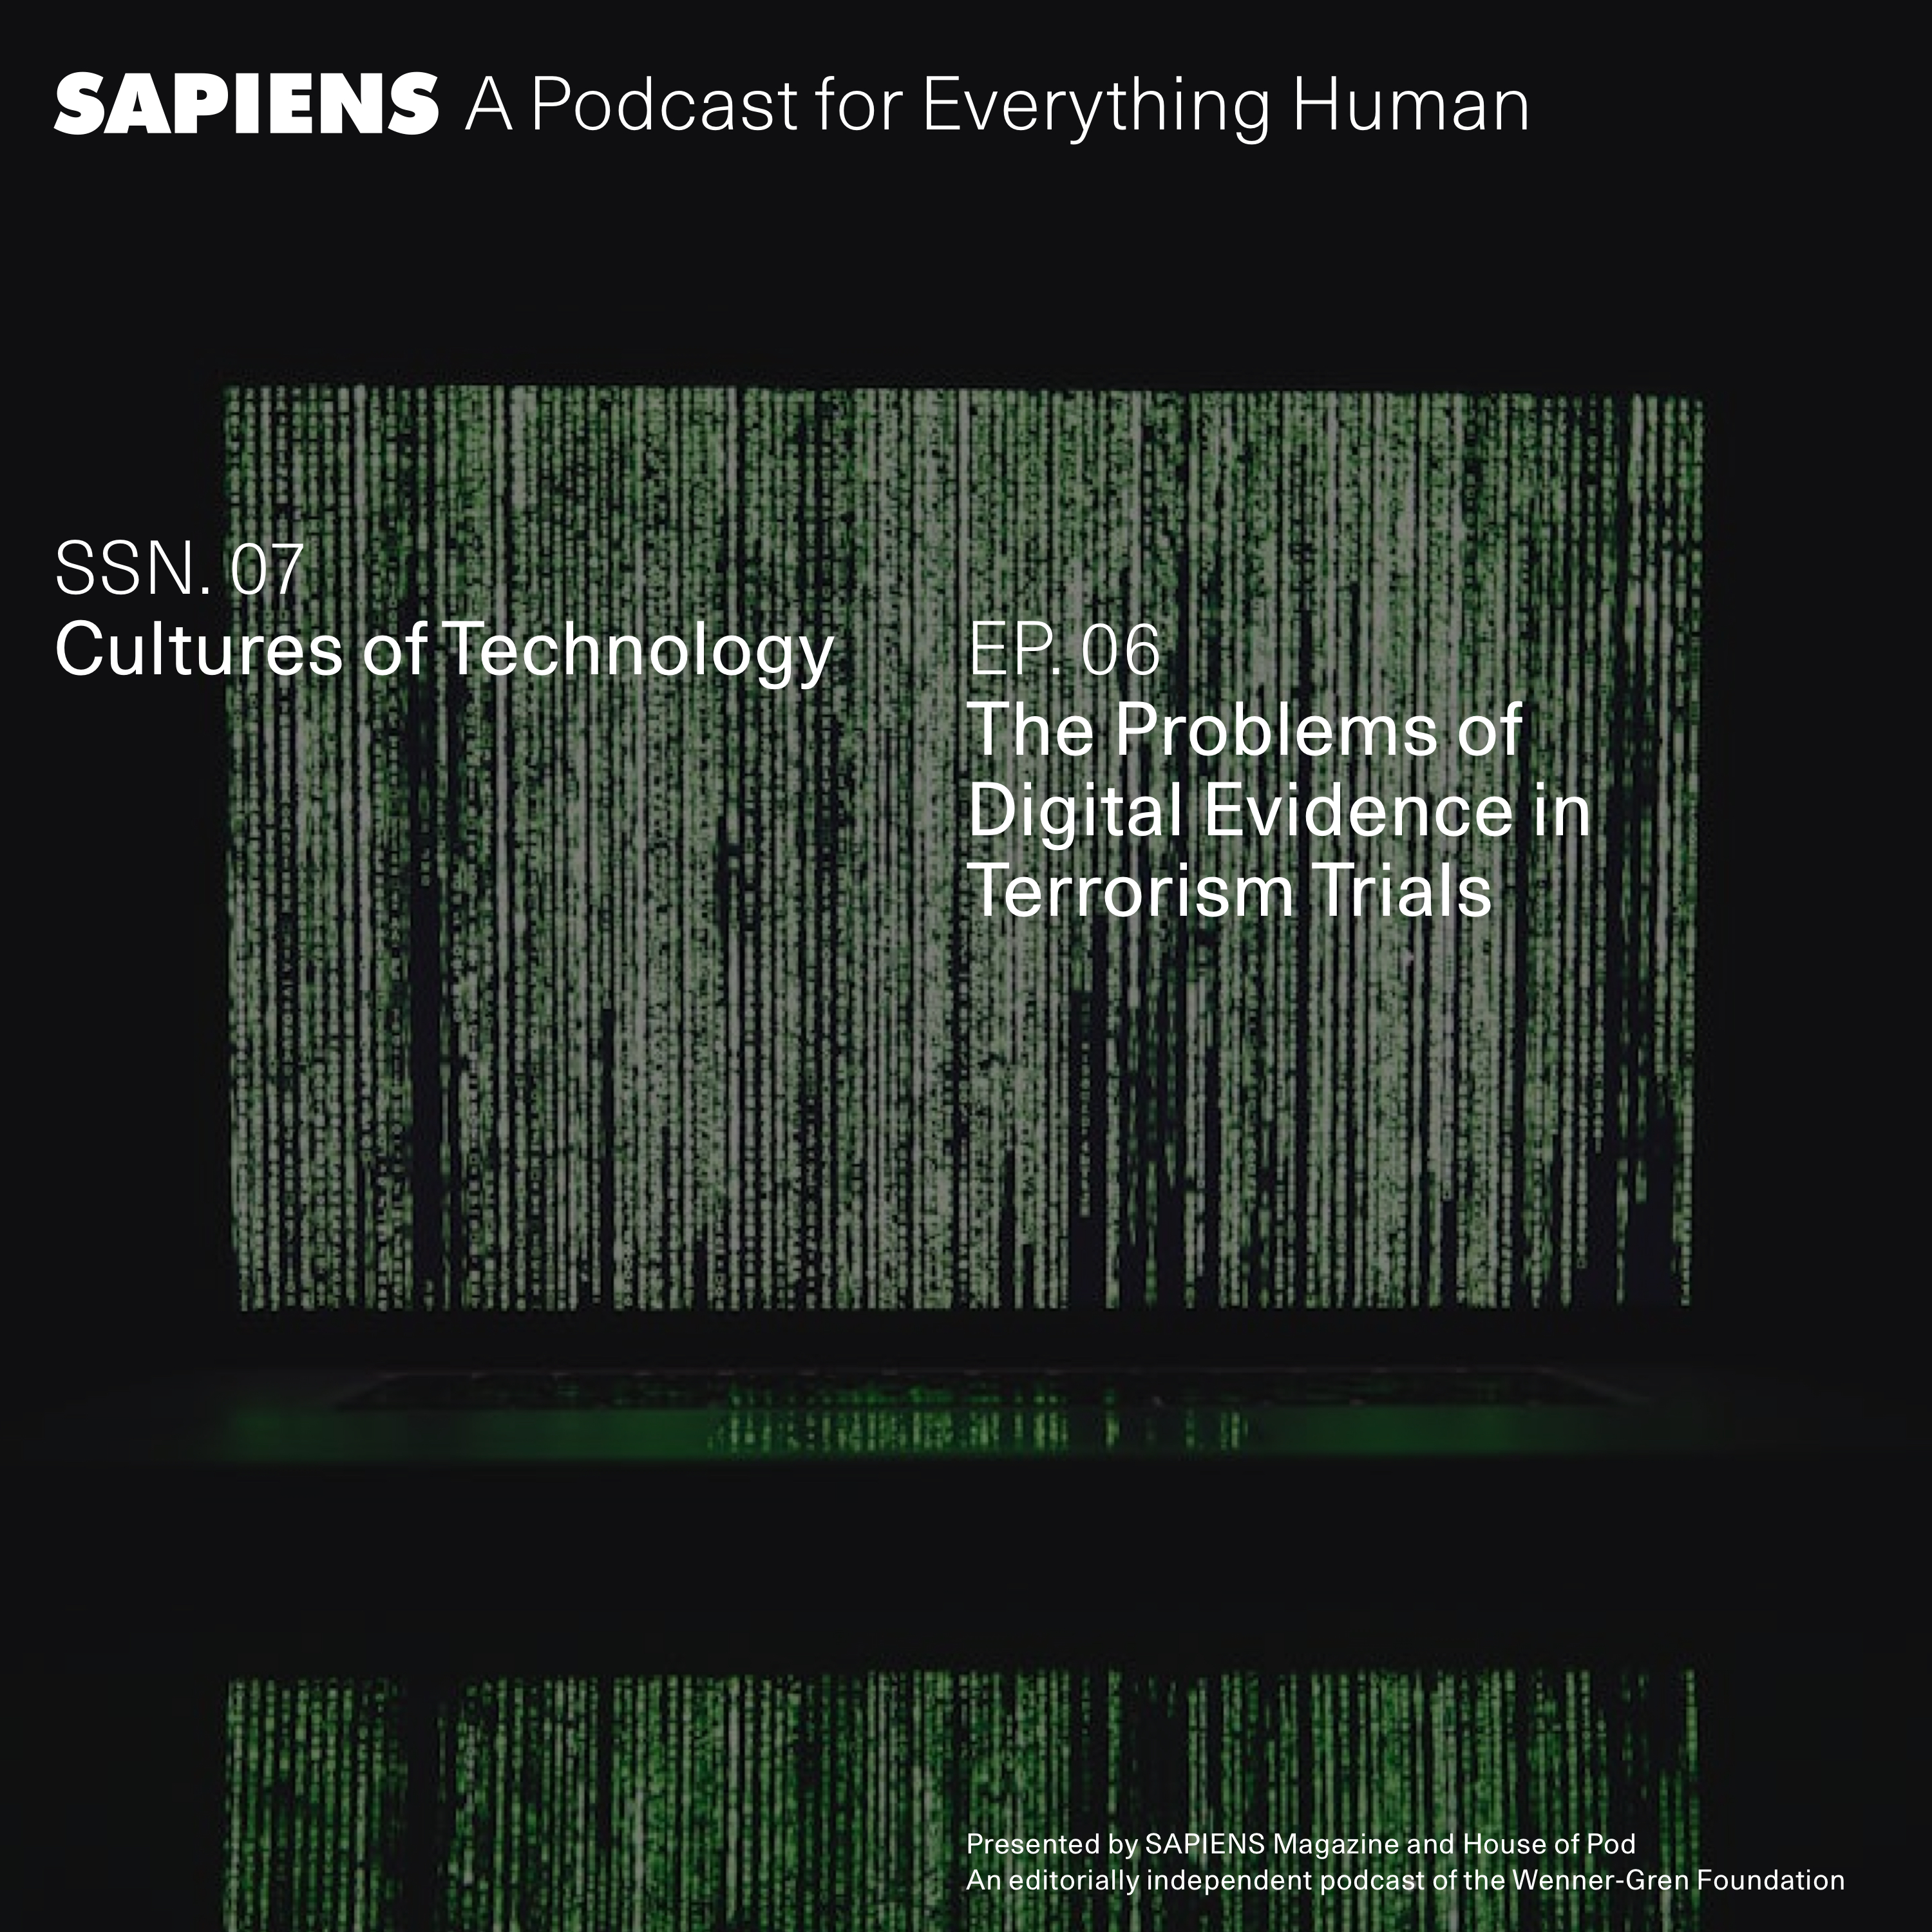 The Problems of Digital Evidence in Terrorism Trials